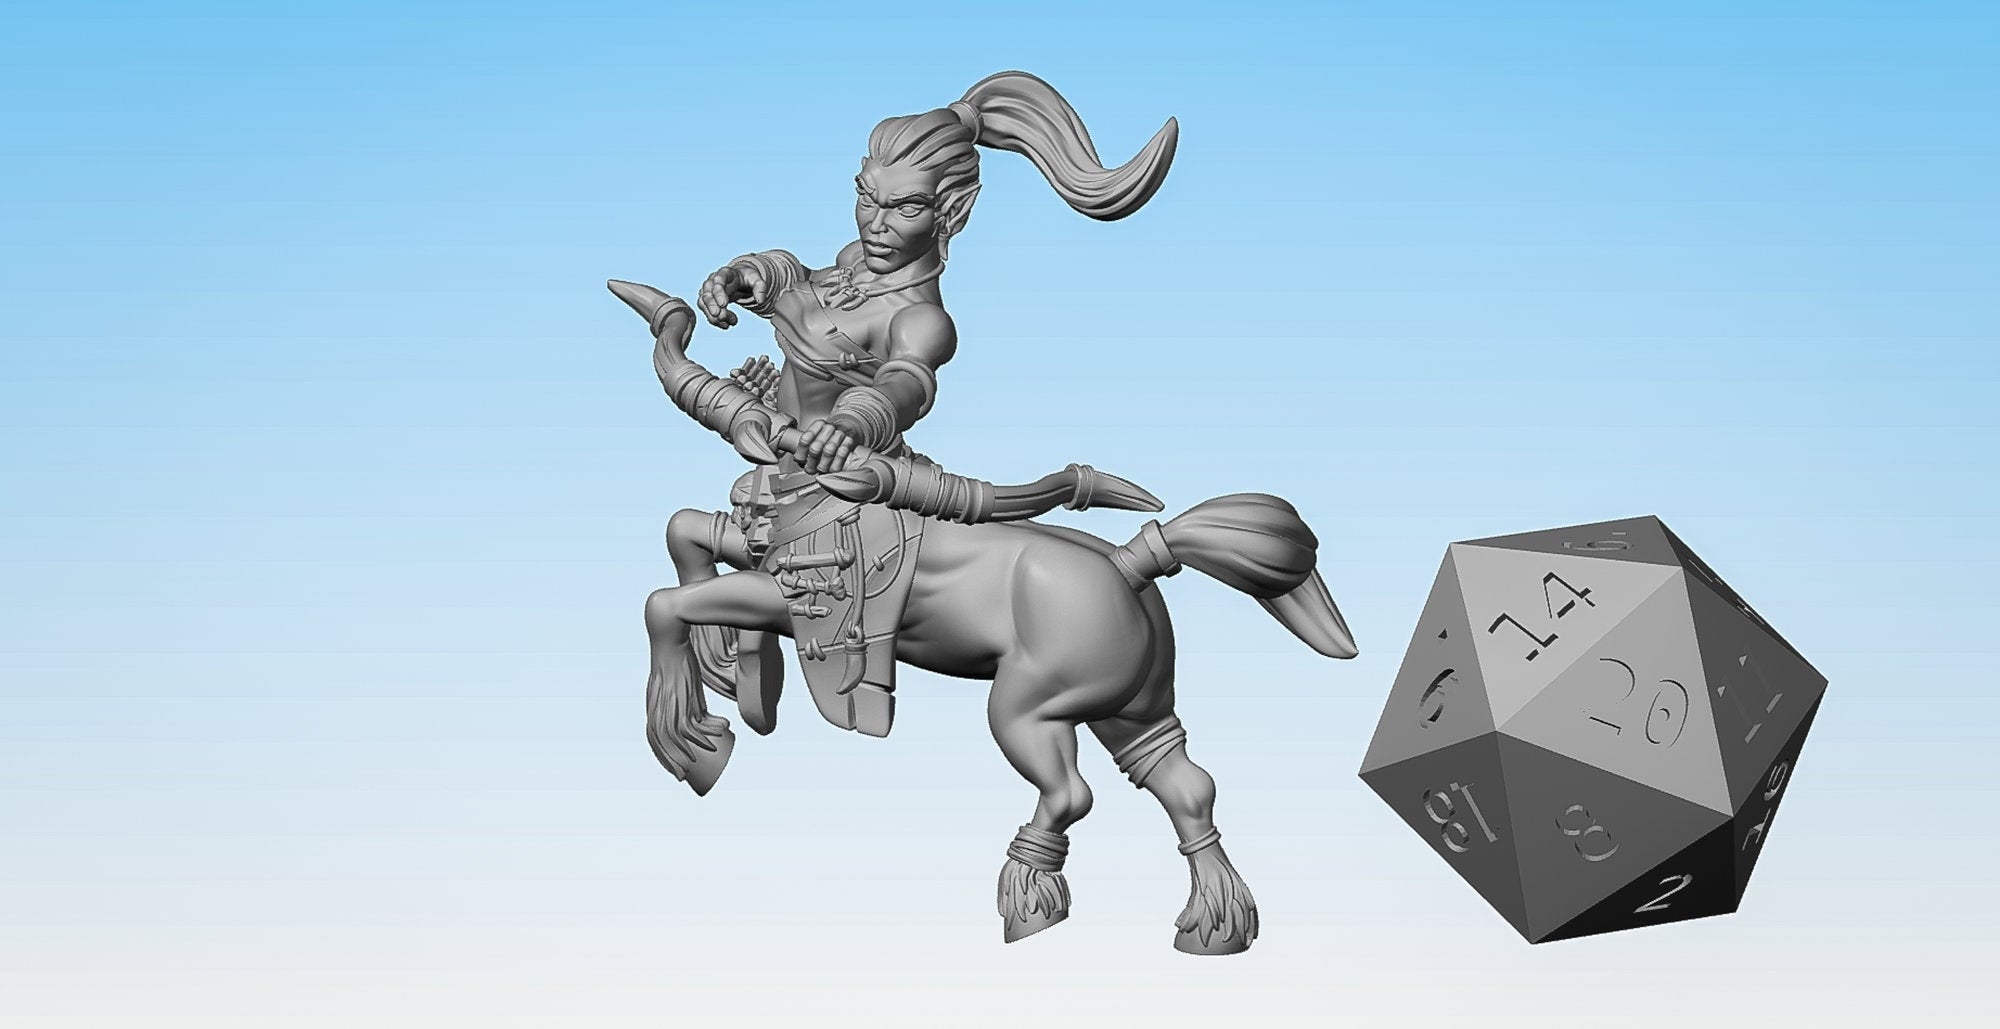 CENTAUR "RANGER" (F) | 3D Print Mini | Resin | Dungeons and Dragons | Pathfinder | Tabletop | RPG | Hero Size | 28 mm-Role Playing Miniatures